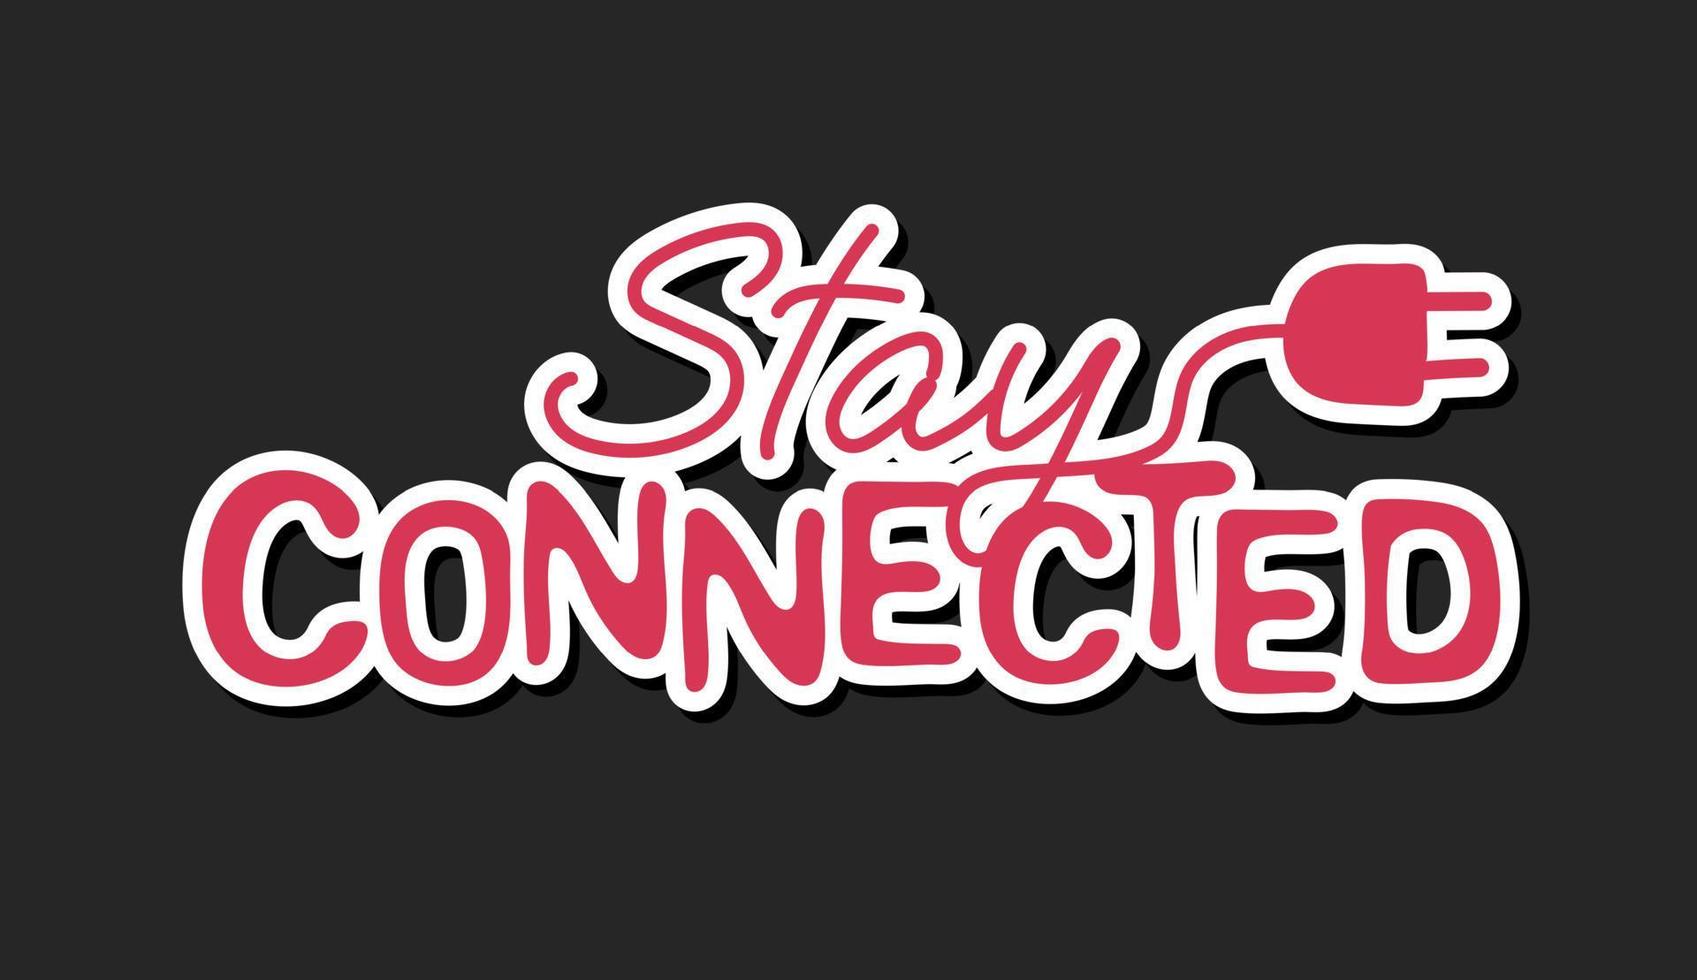 Stay connected quote typography. Sticker for social media content vector